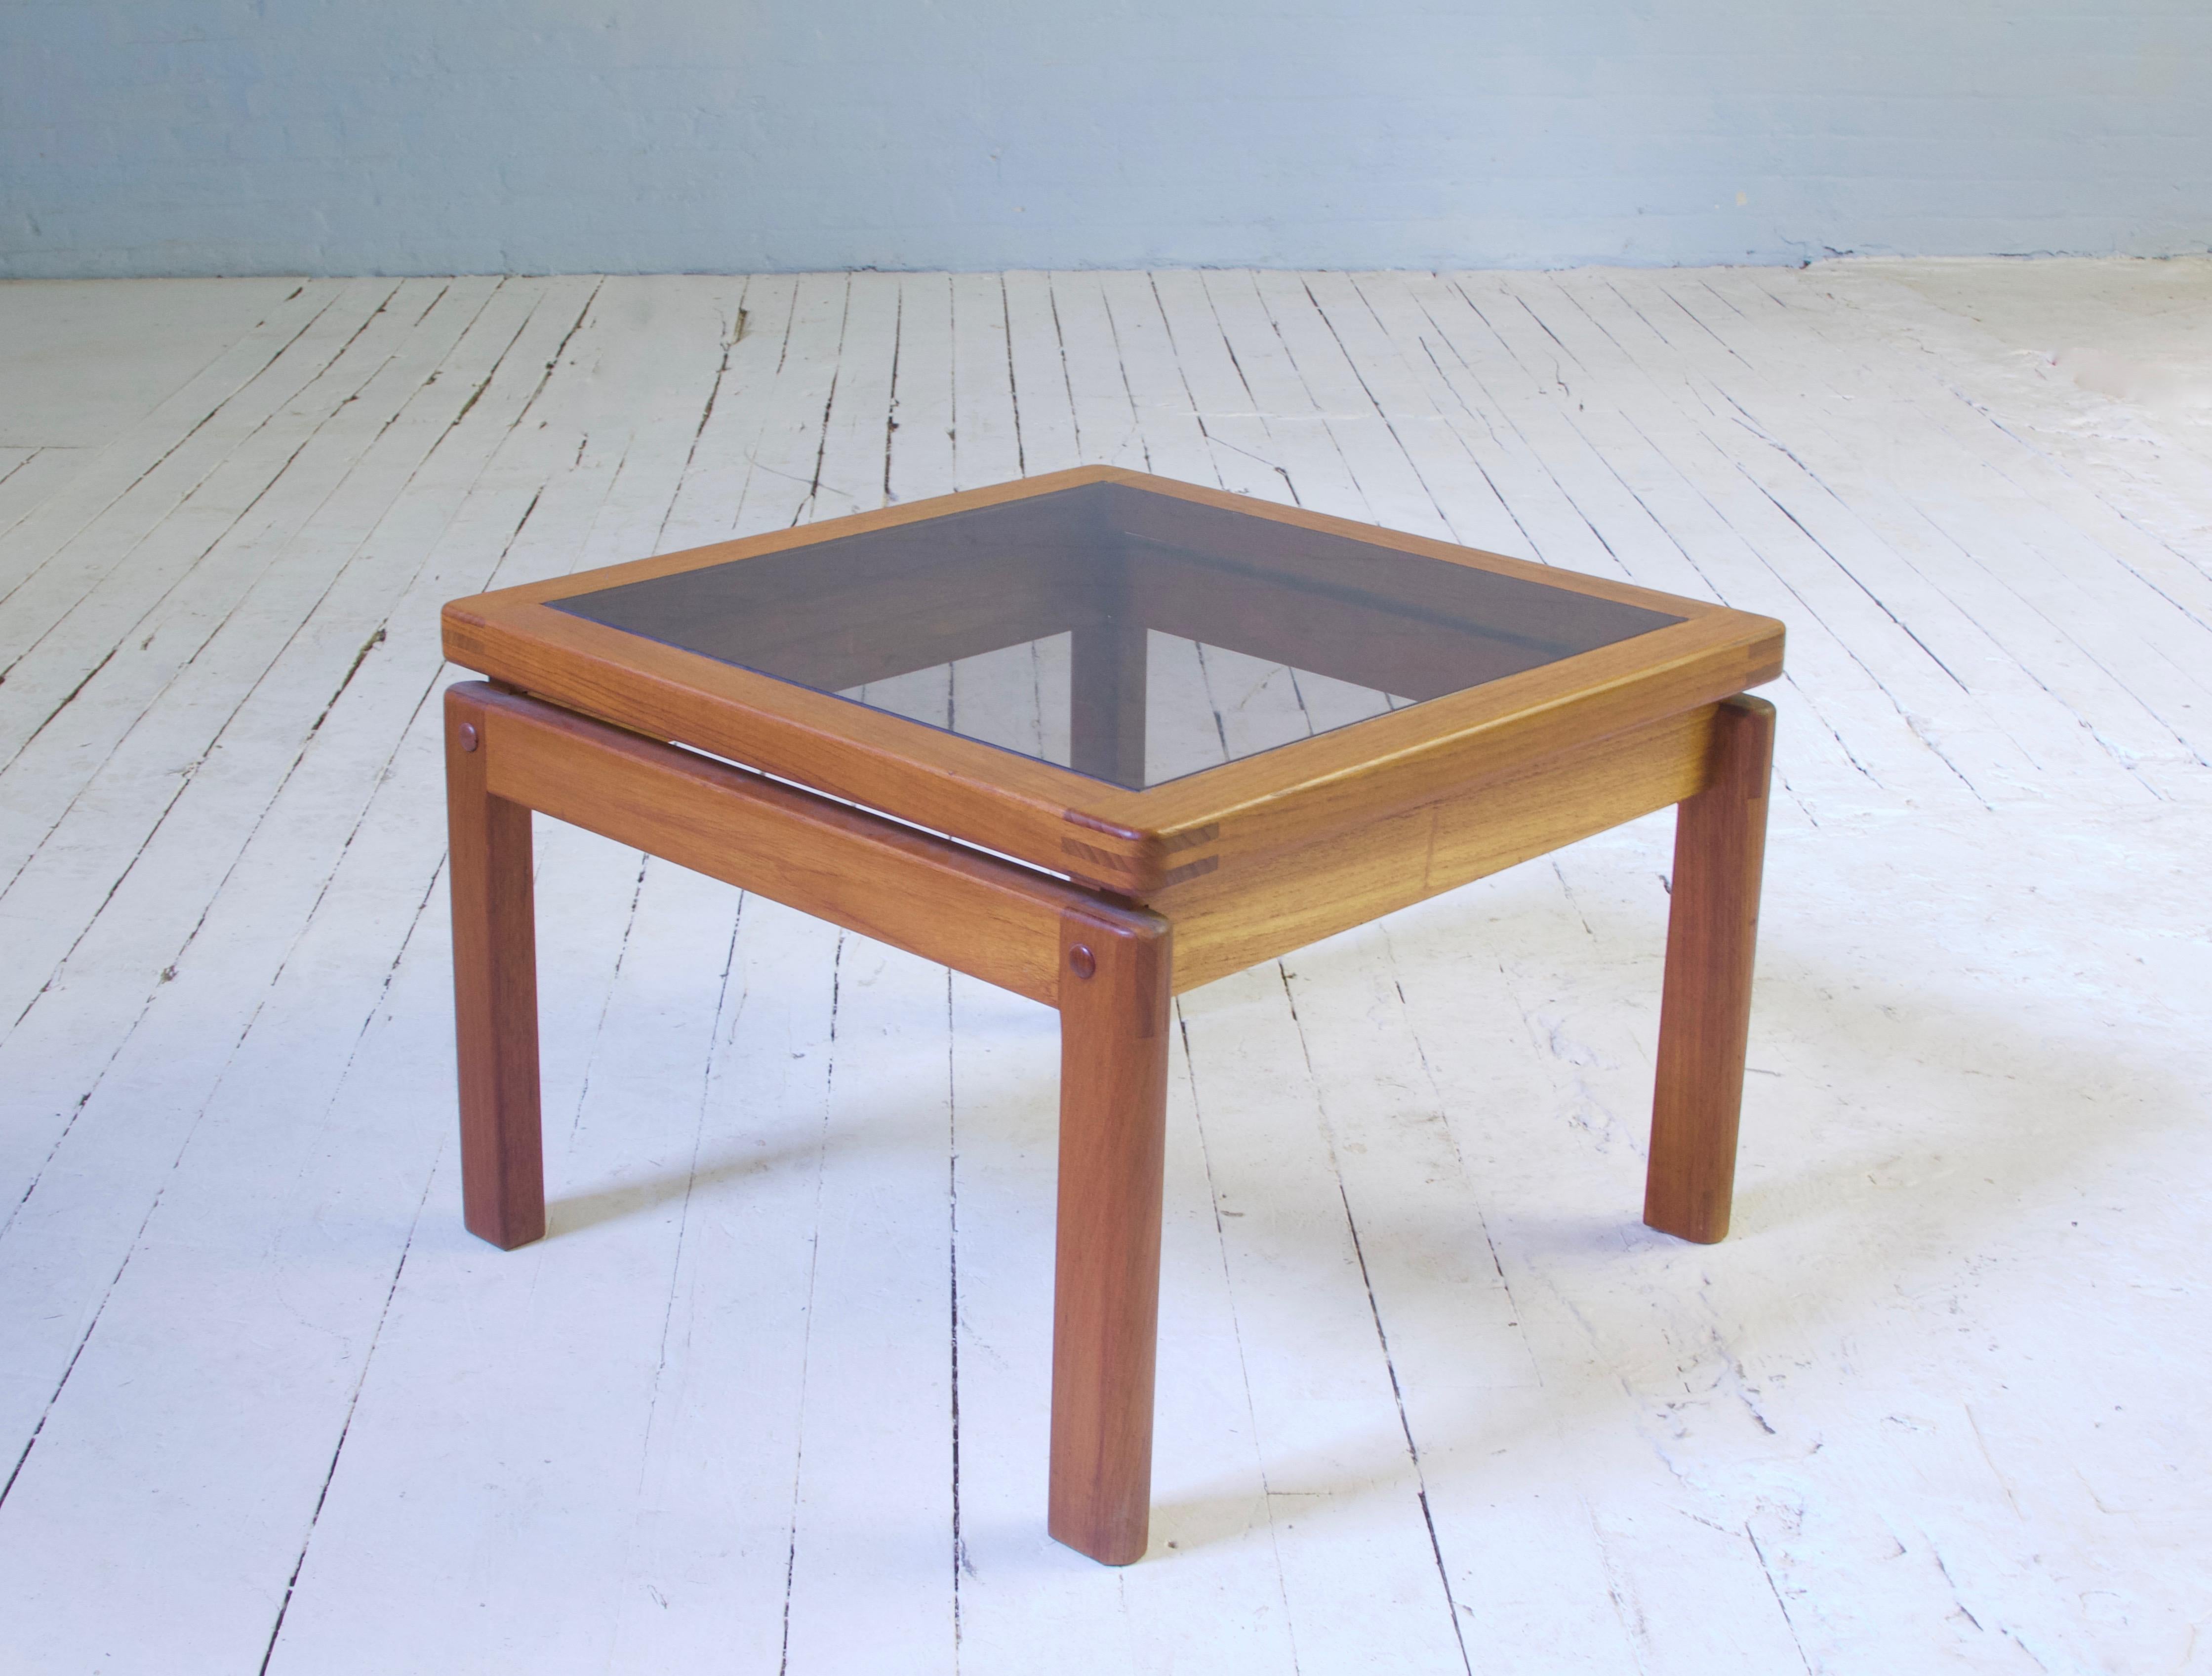 Woodwork Vintage Pair of Signed Danish Side Tables with Exposed Joinery in Teak, 1960s For Sale